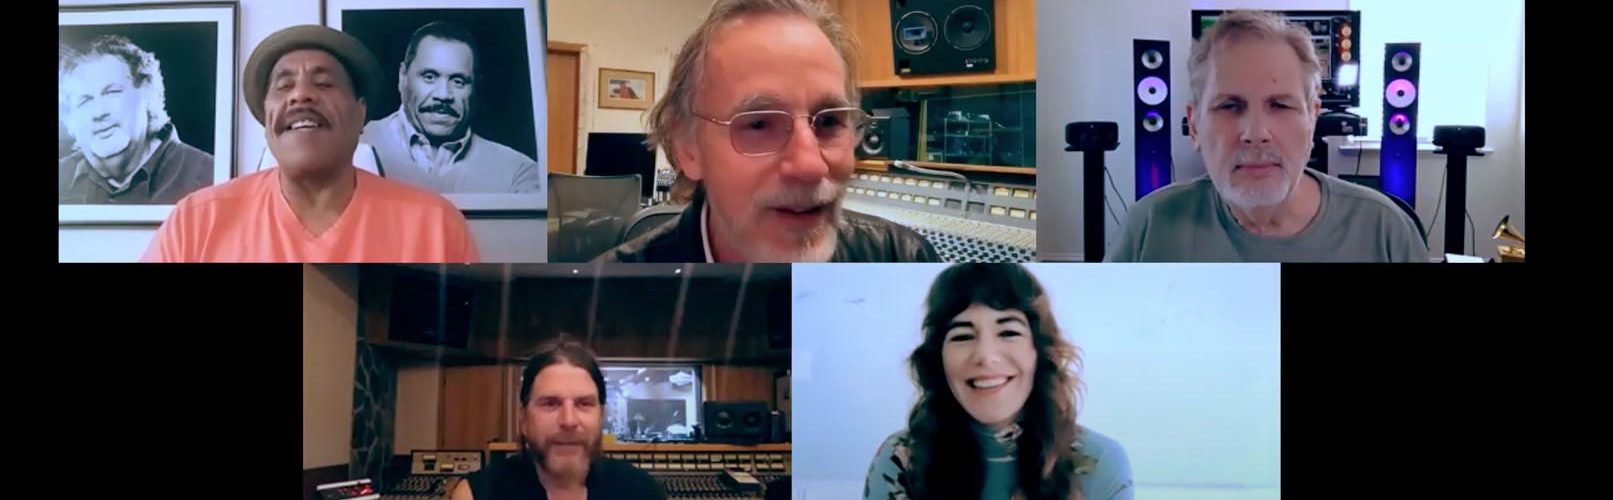 Pensado’s Place recently hosted an episode with members of the super-group that created the collaborative album Let the Rhythm Lead: Haiti Song Summit, Vol. 1. Pictured L-R, top row: Herb Trawick, Jackson Browne and Dave Pensado; bottom row: Jonathan Wilson and Jenny Lewis.